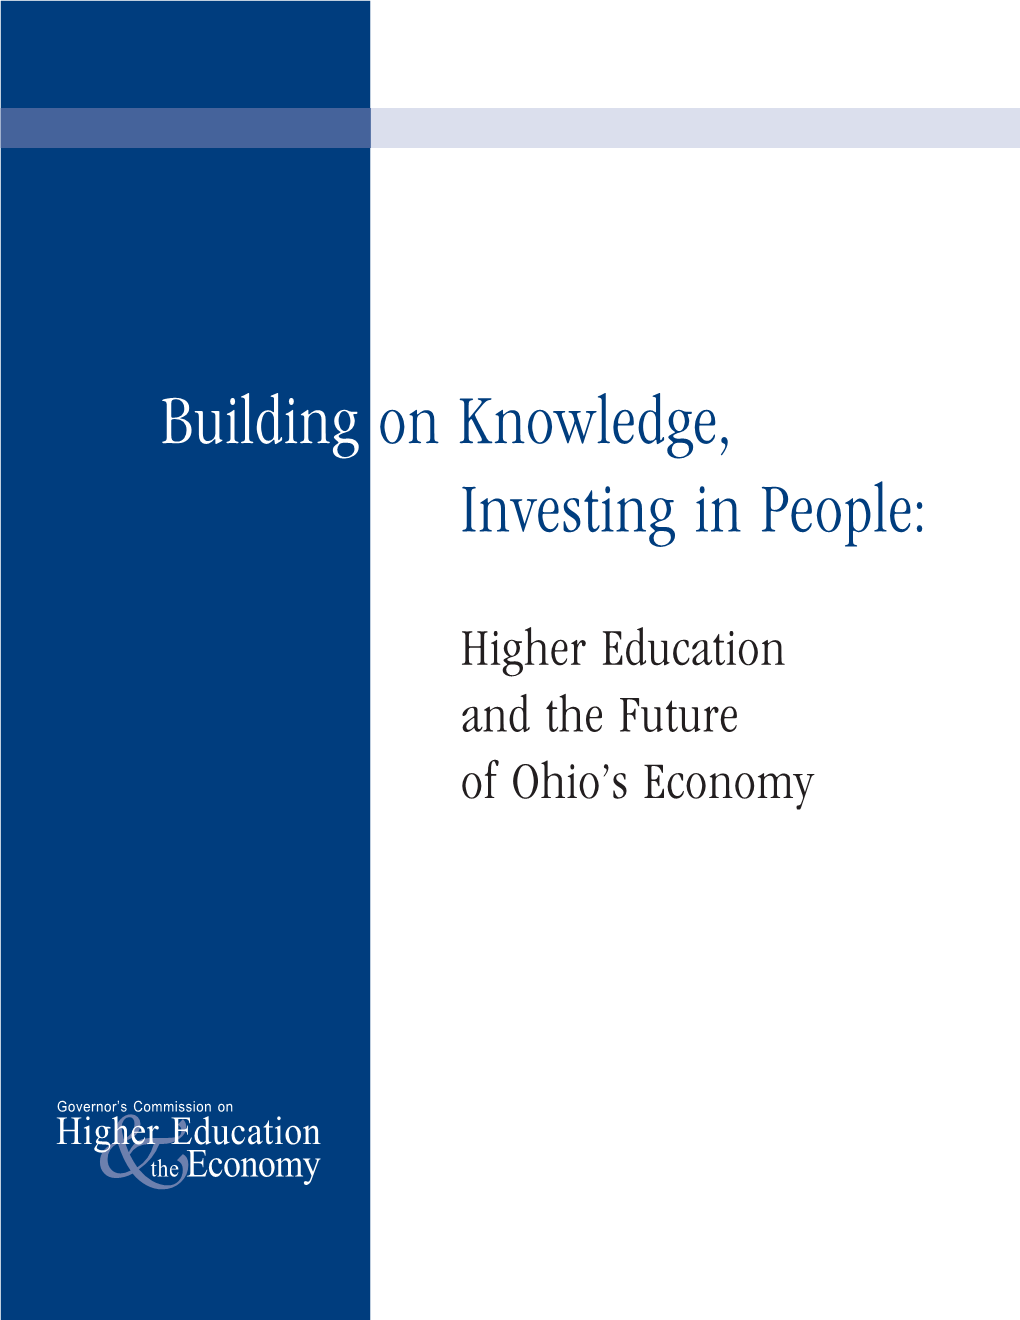 The Governor's Commission on Higher Education & the Economy